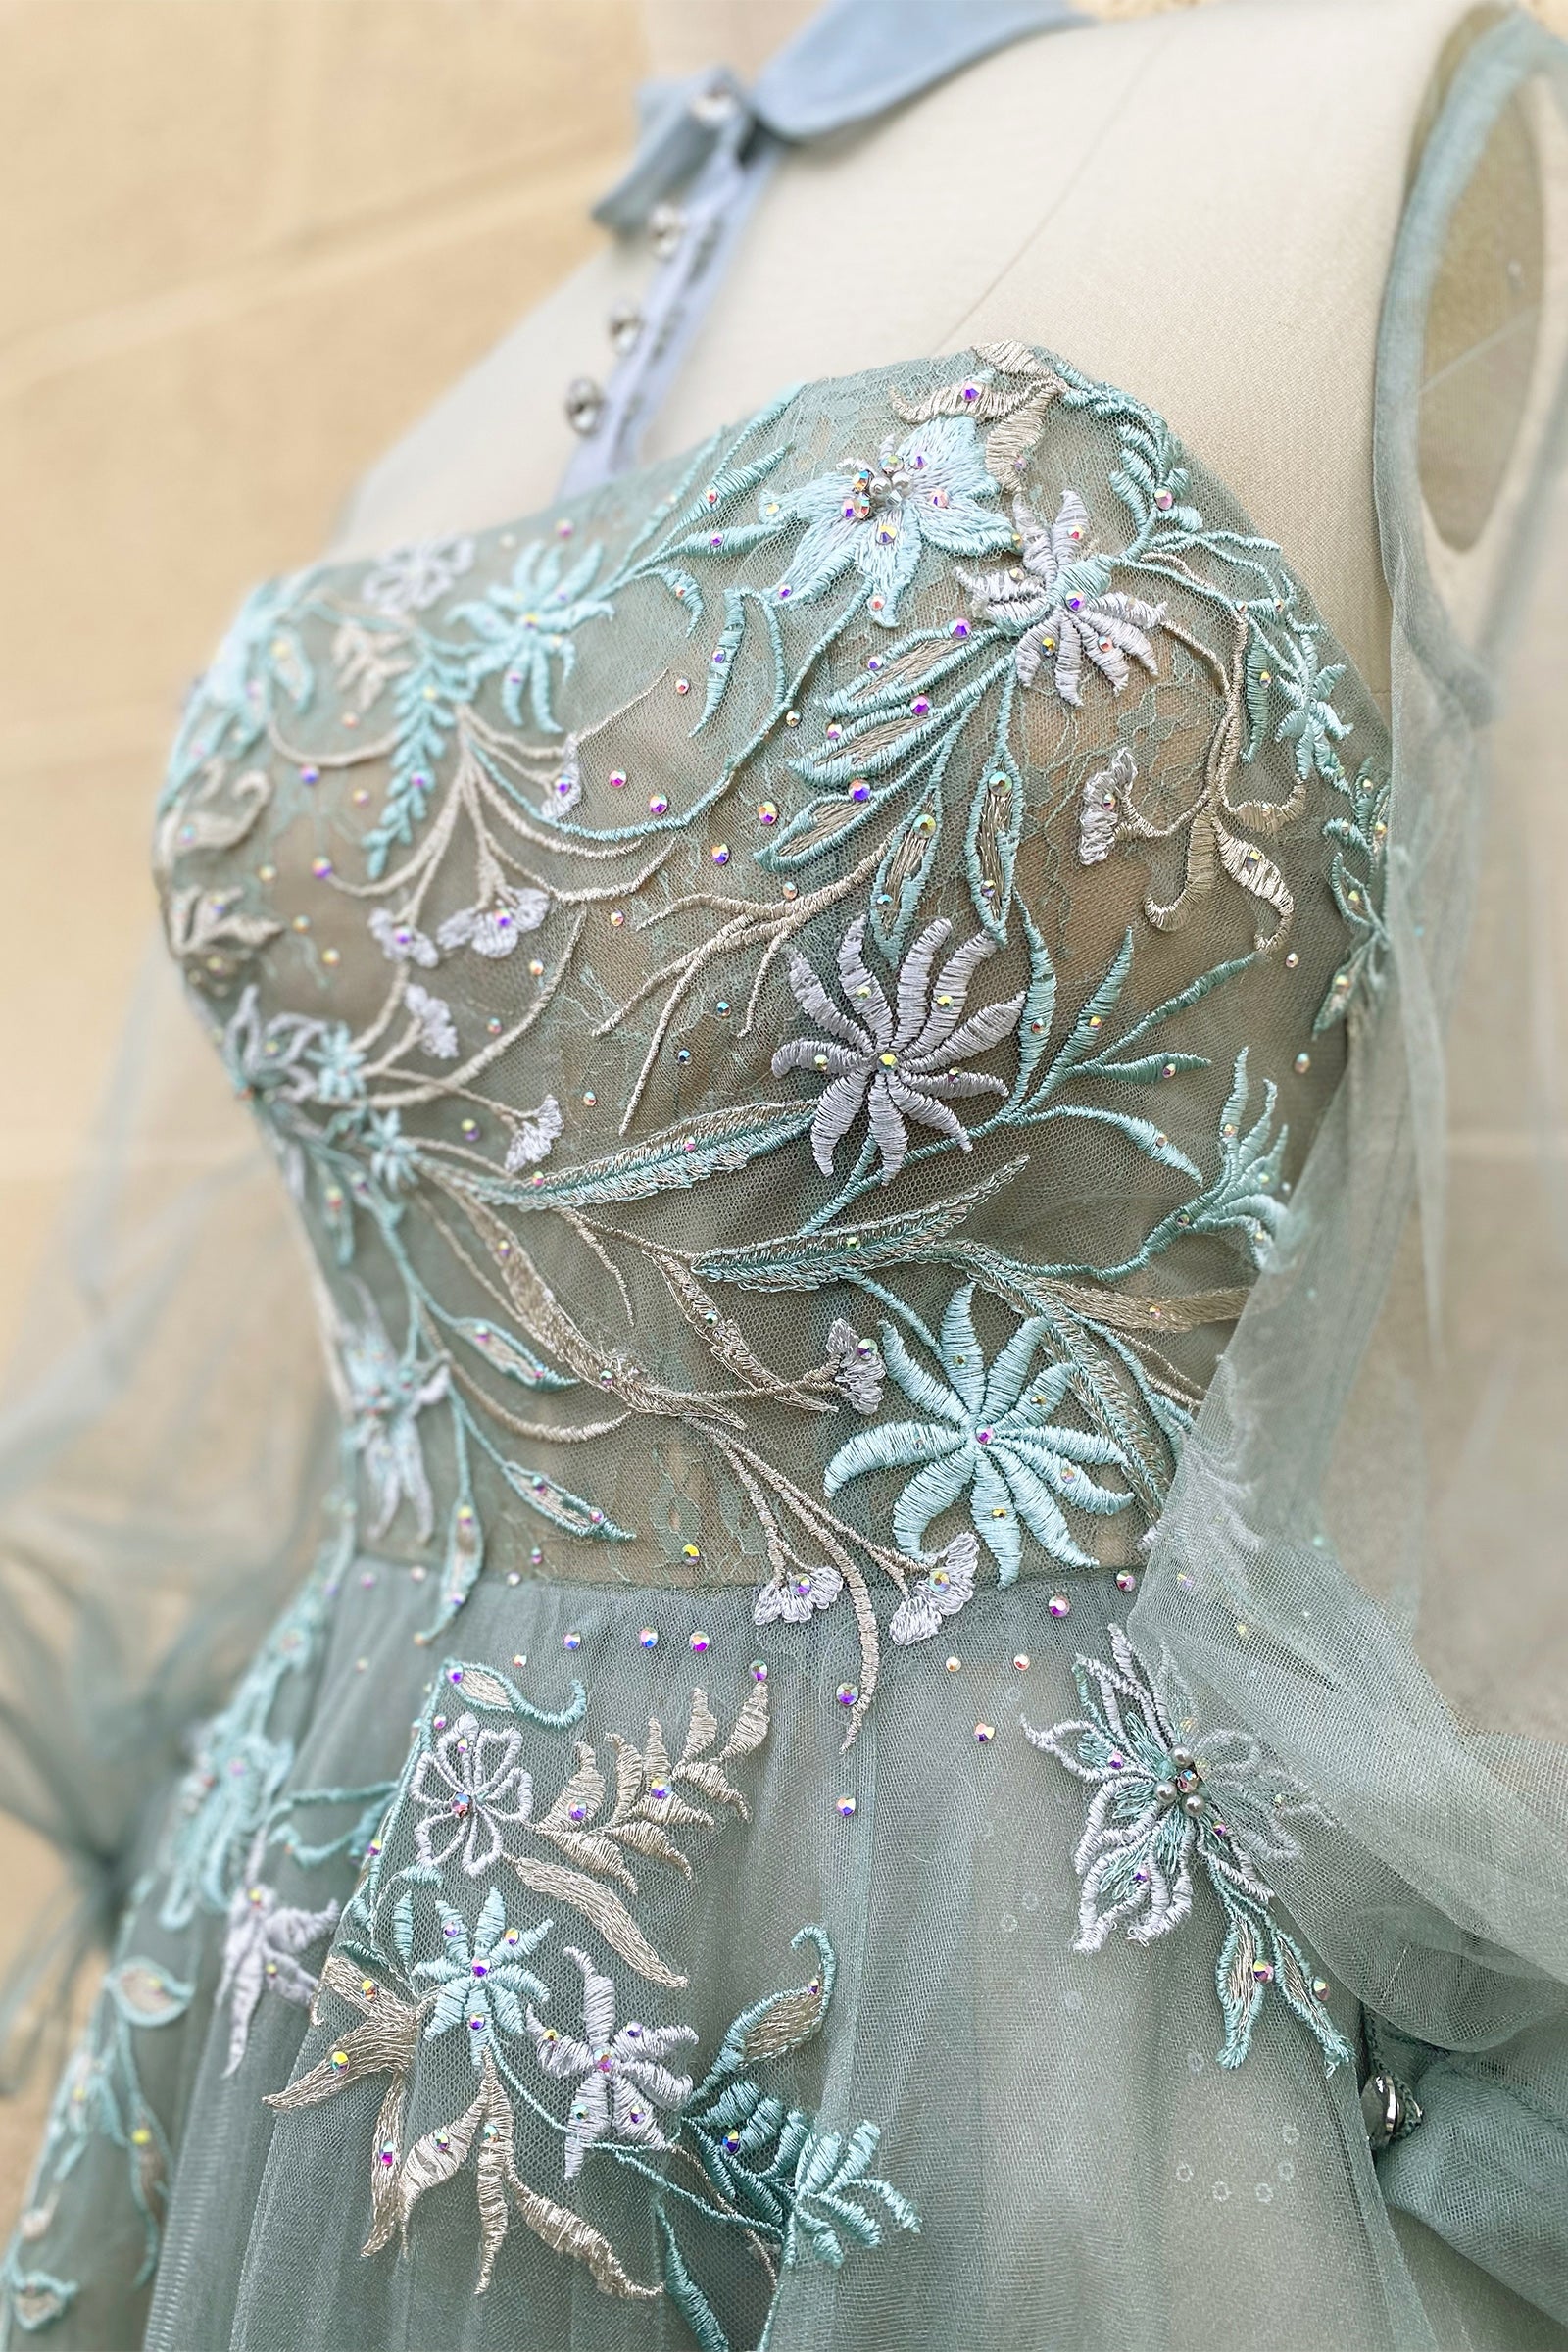 The Duchesa is perfectly appropriate for any special occasion. A fan favorite, this a-line cocktail dress in a beautiful pastel hue features a classic collar with an illusion yoke that connects to a corset-structured bodice overlayed with floral embroider